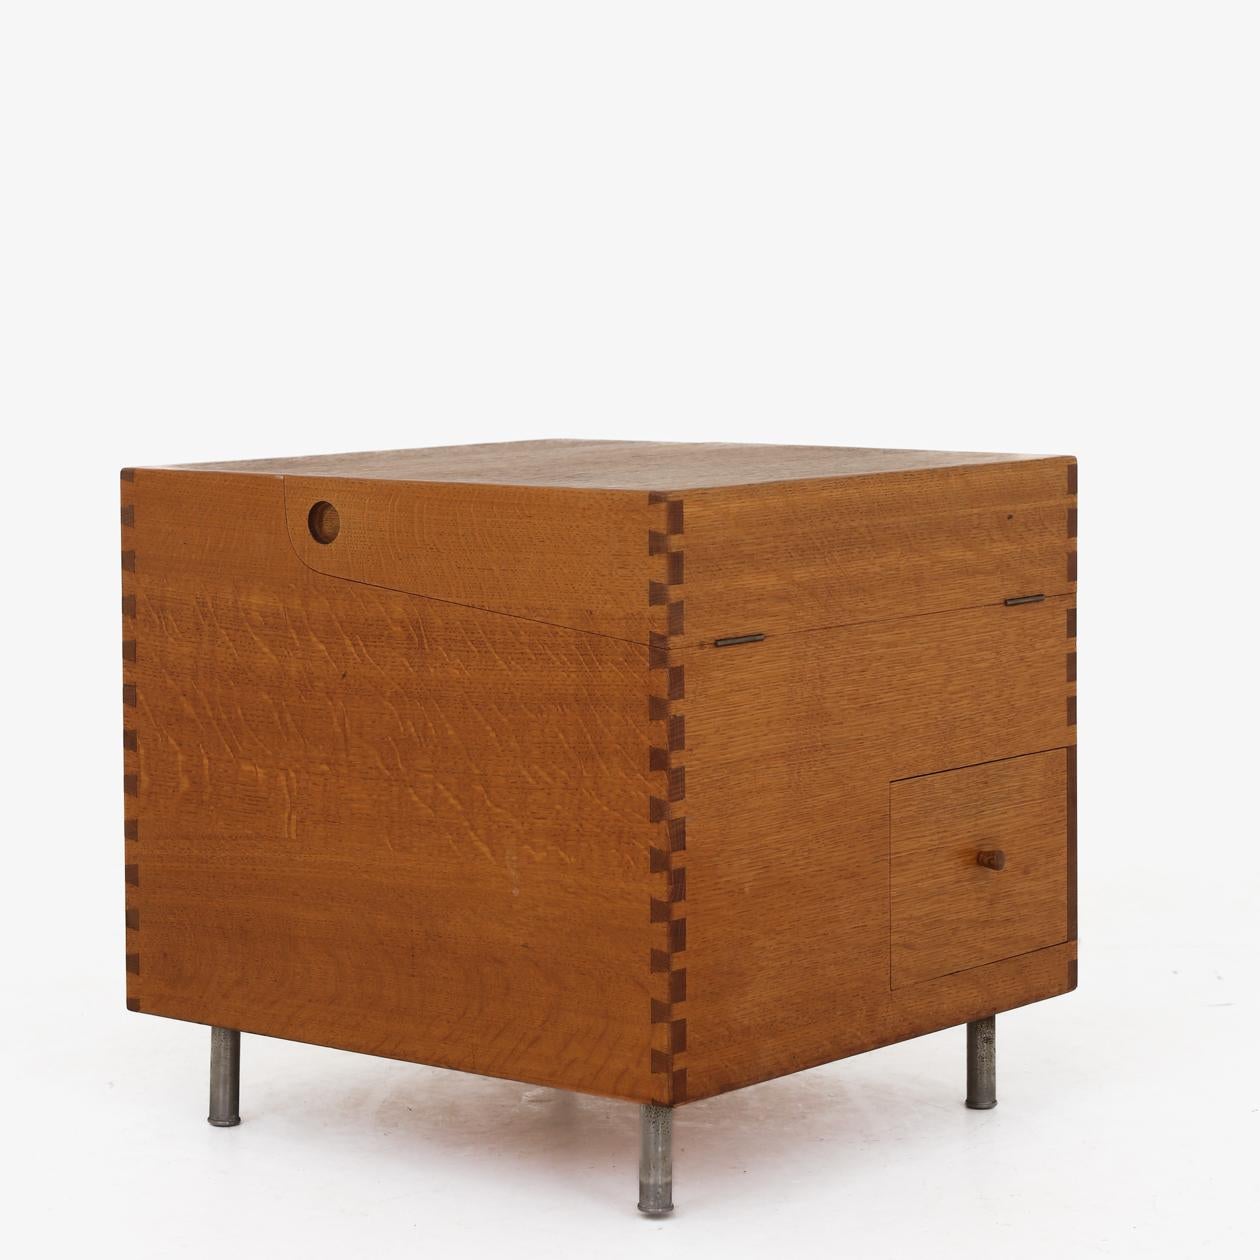 AT 34 - Rare cube-shaped bar cabinet made of solid and veneered oak, mounted on round steel legs. Interior with storage room. Designed in 1956. Hans J. Wegner / Andreas Tuck